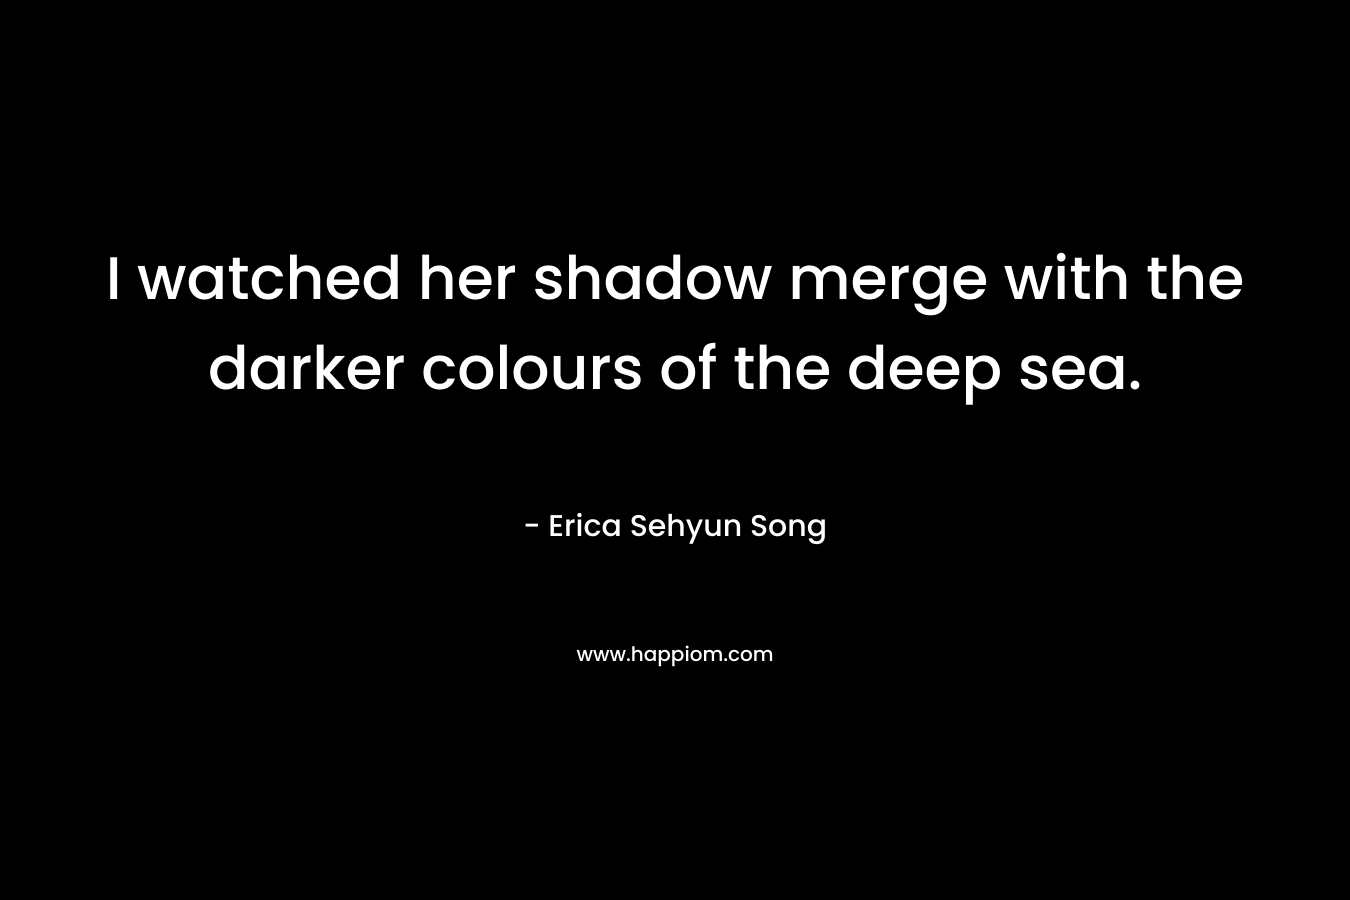 I watched her shadow merge with the darker colours of the deep sea. – Erica Sehyun Song